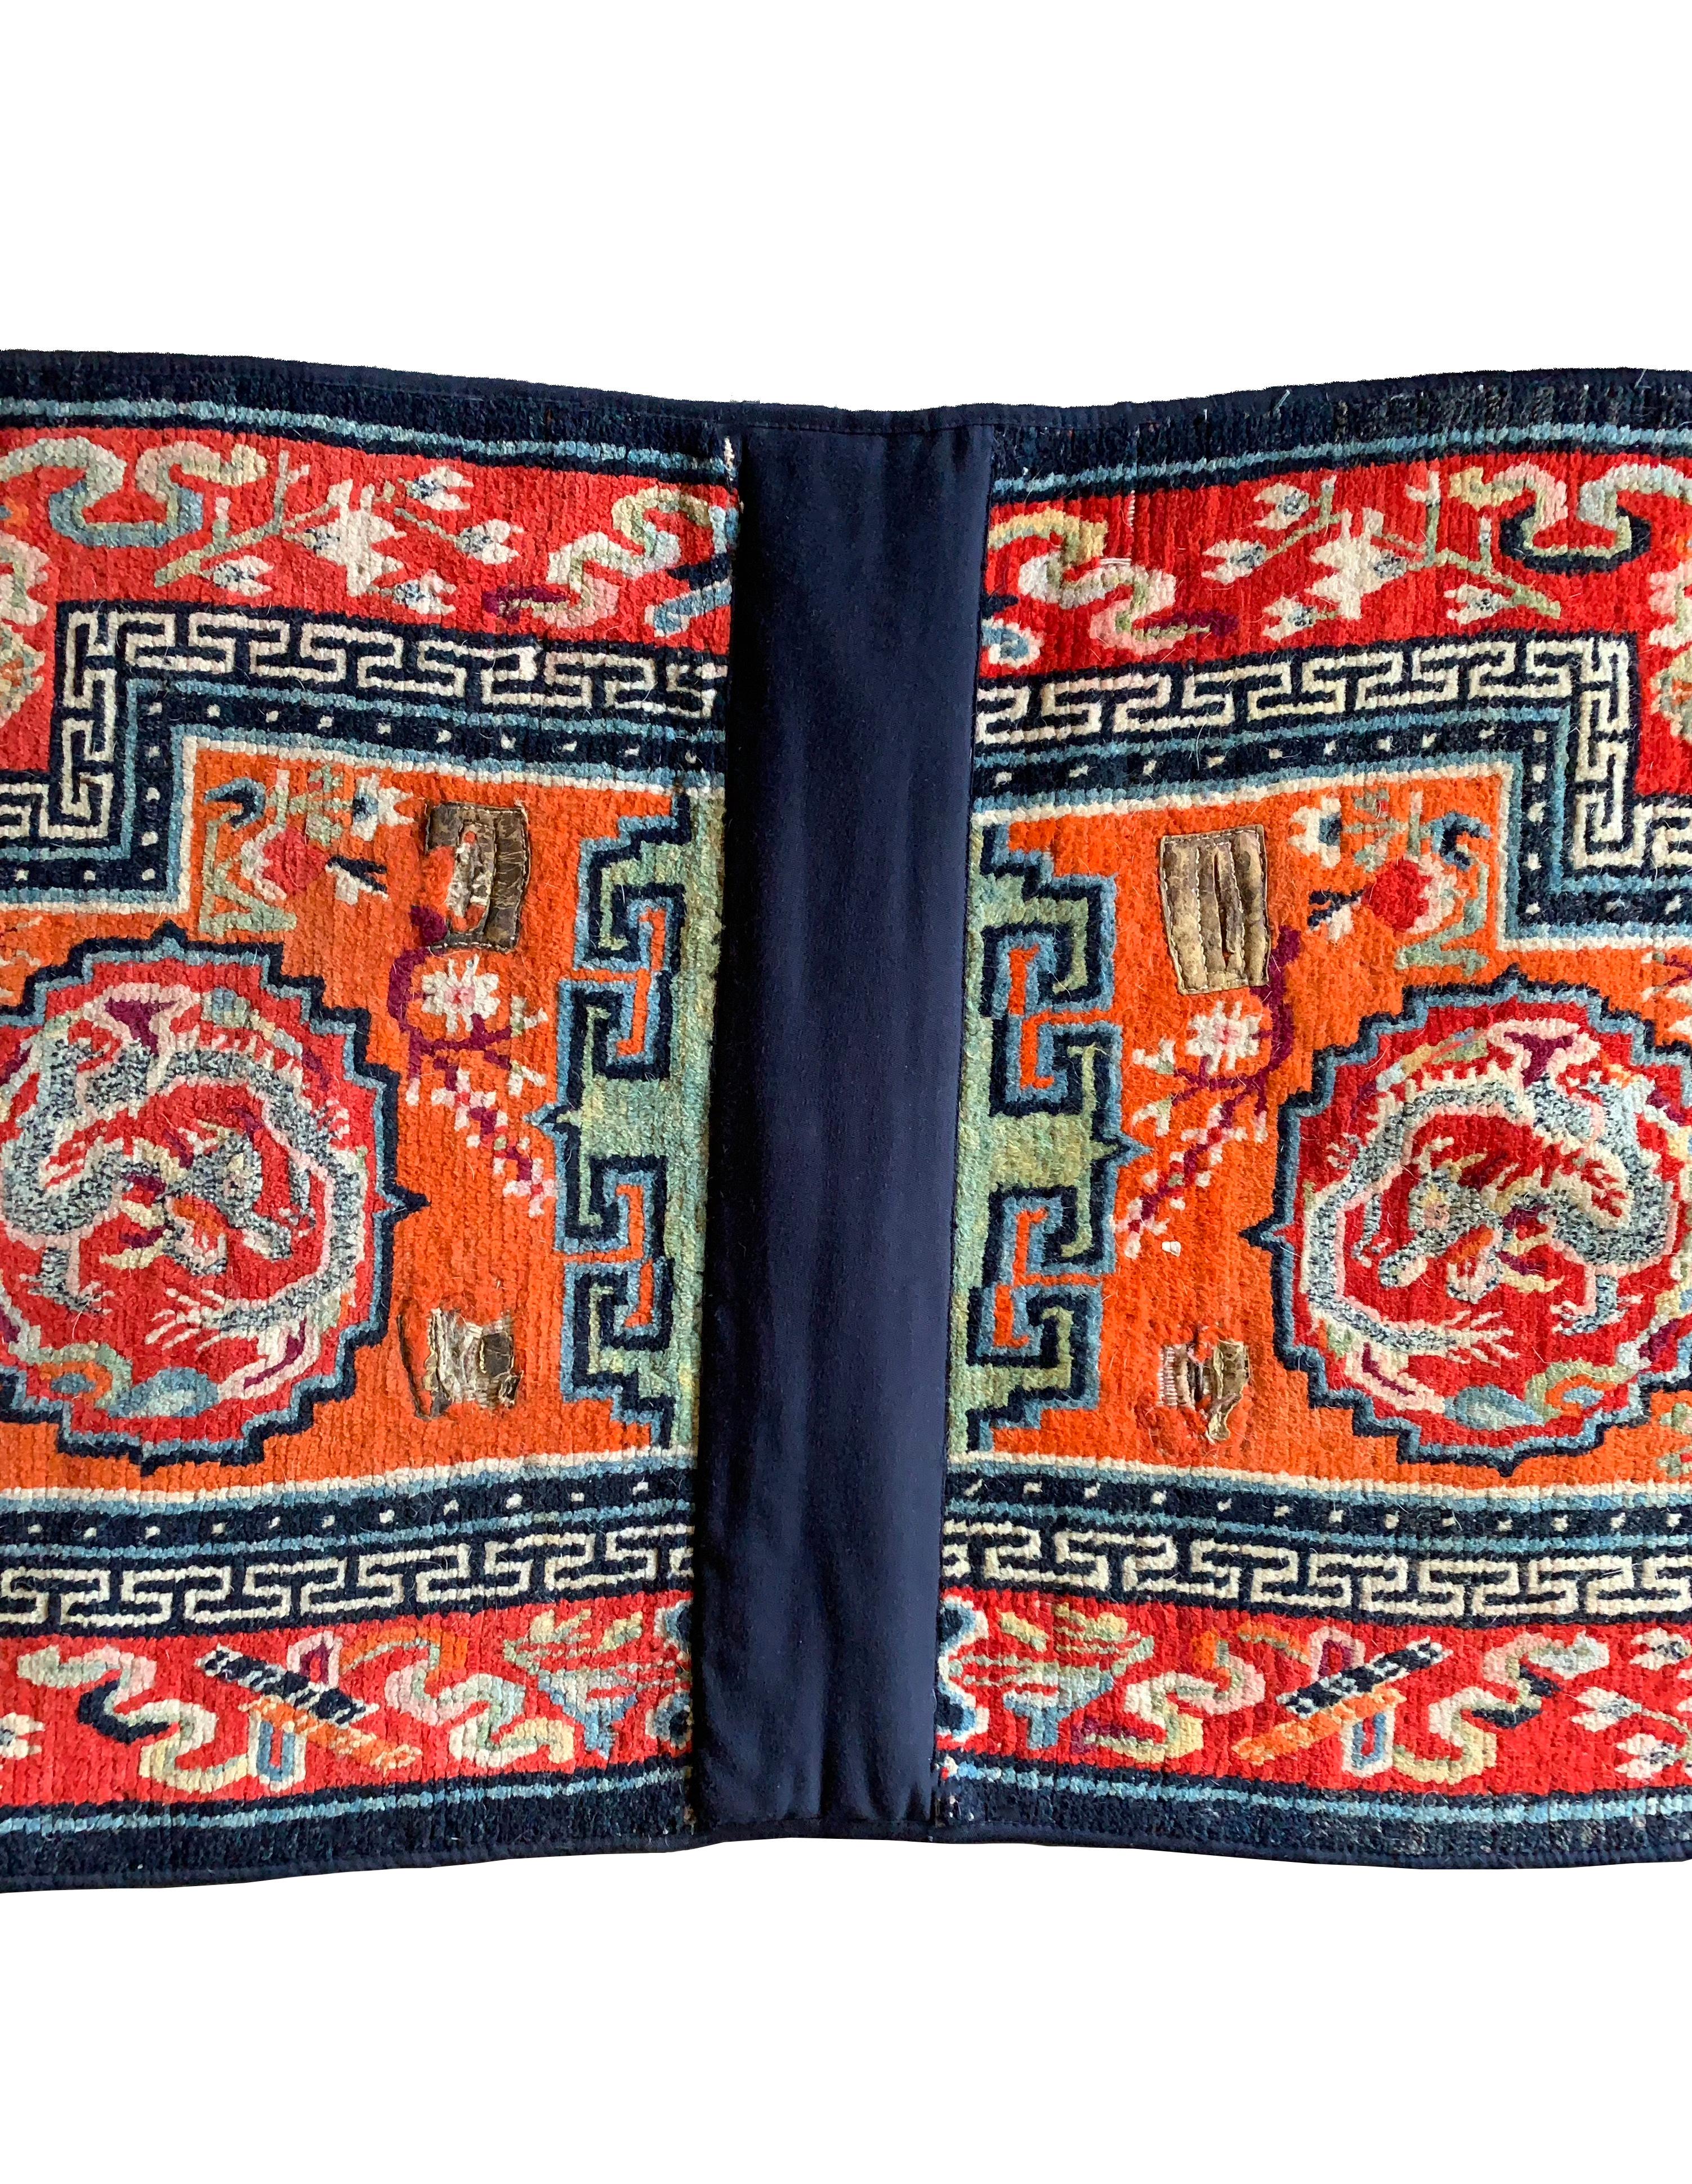 A saddlecloth, used as a decorative and padded element to accompany Tibetan horseman's saddles. Saddlecloths were placed on a horses back between the horses back and saddle of the ridder. This saddlecloth features a newly added cotton lining